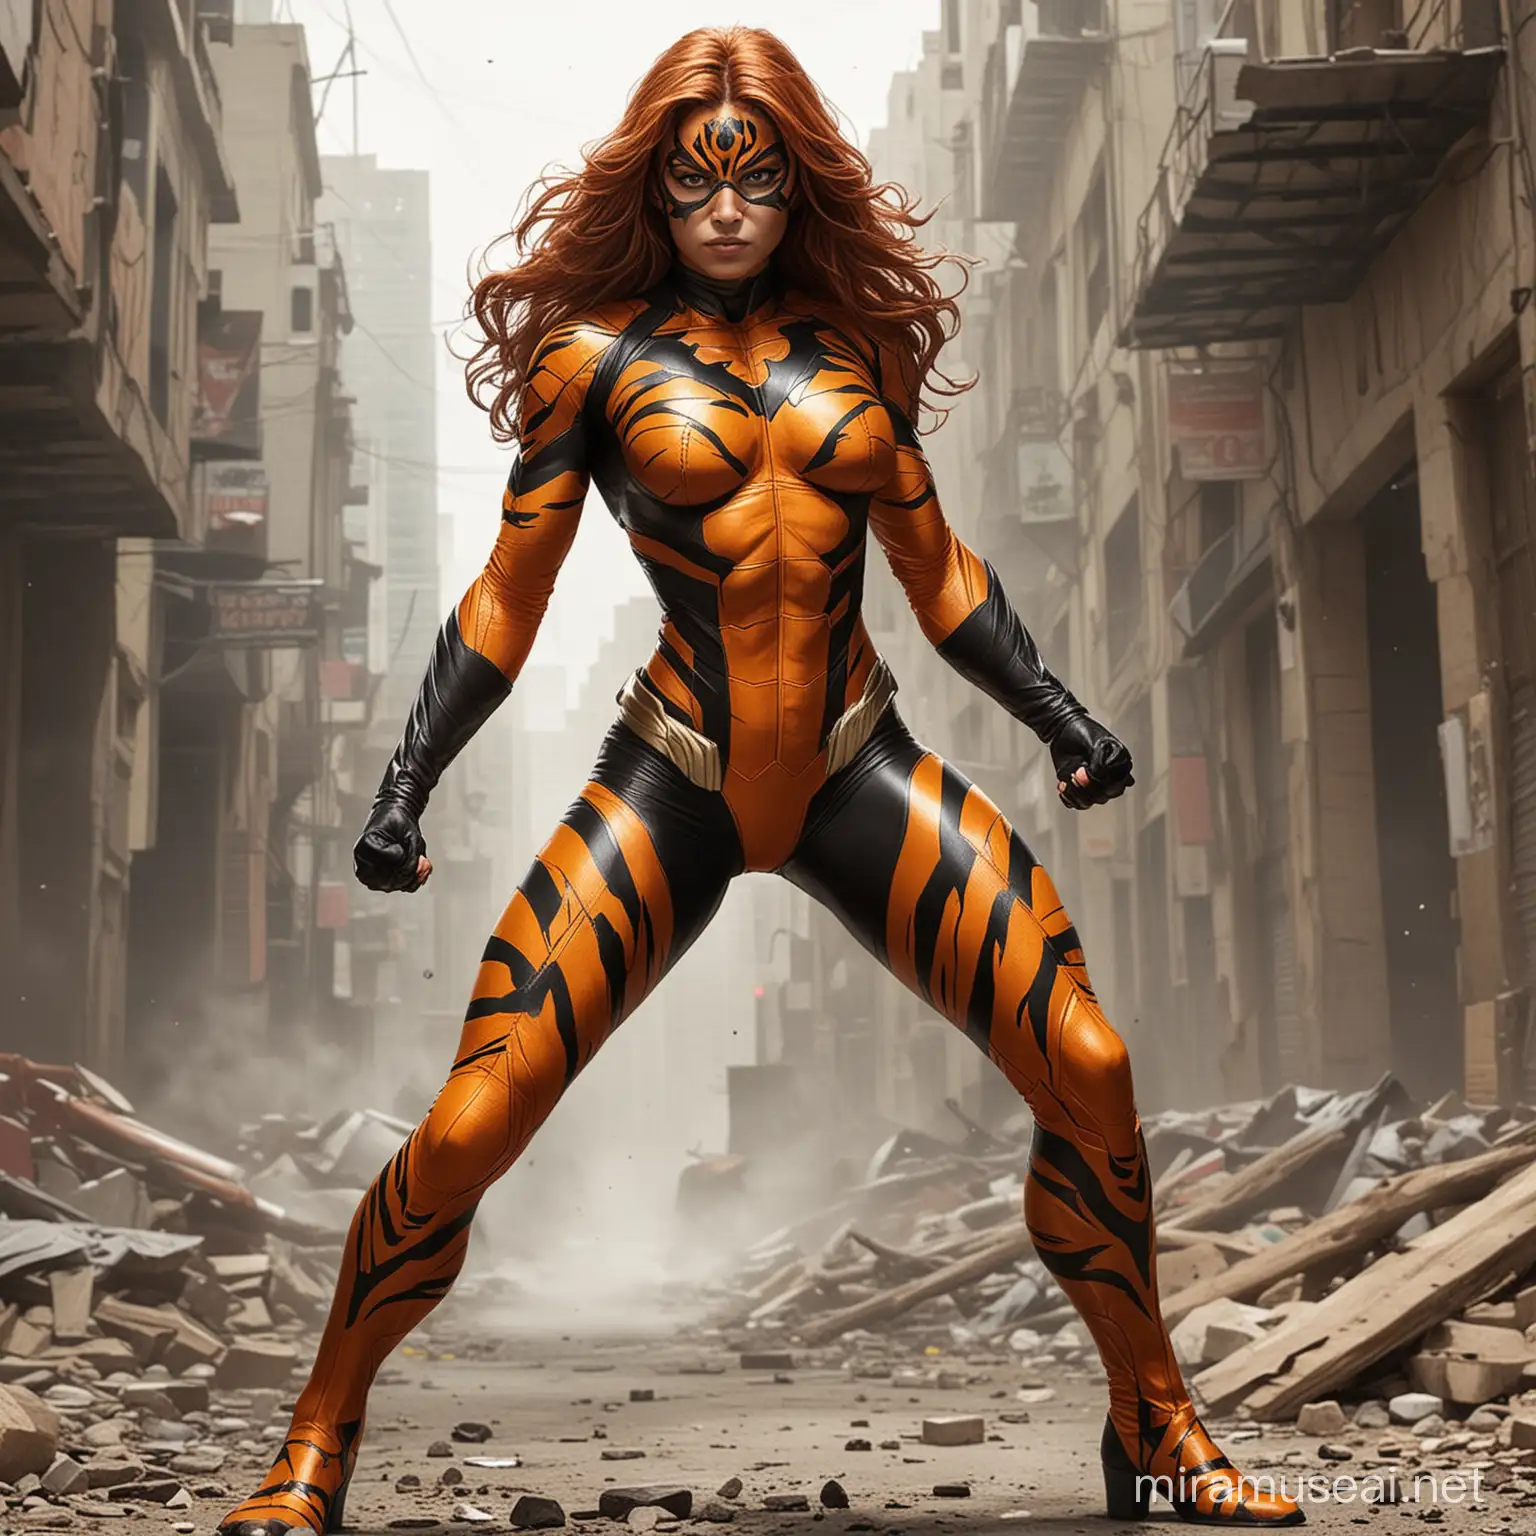 Empowering Tiger Woman A New Female Superhero Unveils Her Strength